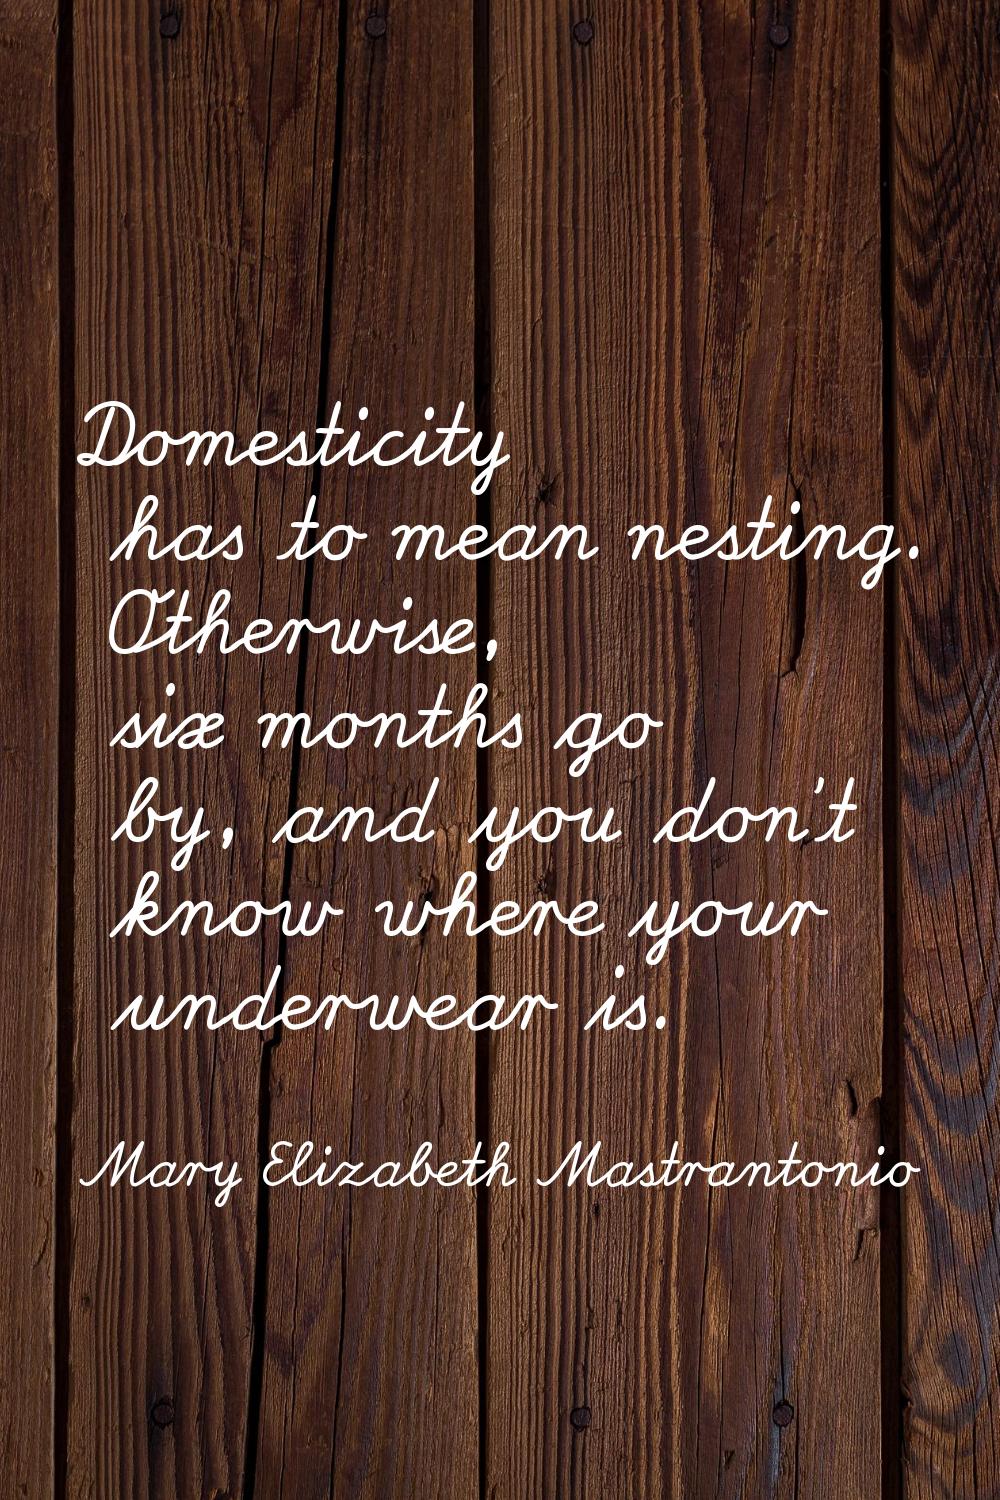 Domesticity has to mean nesting. Otherwise, six months go by, and you don't know where your underwe